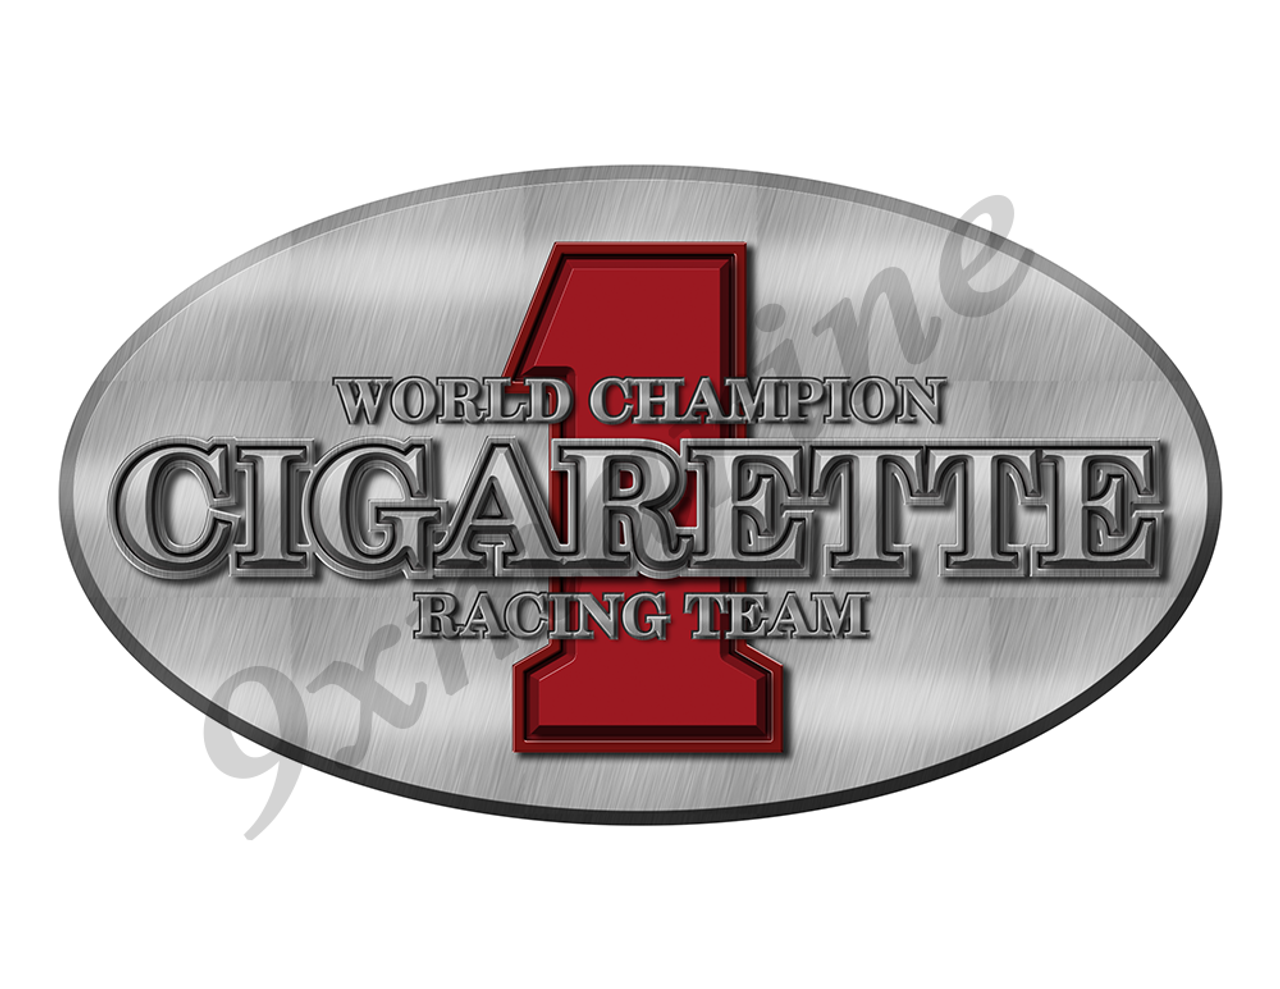 One Cigarette Oval Sticker. Brushed Metal Style - 10"x5.5"